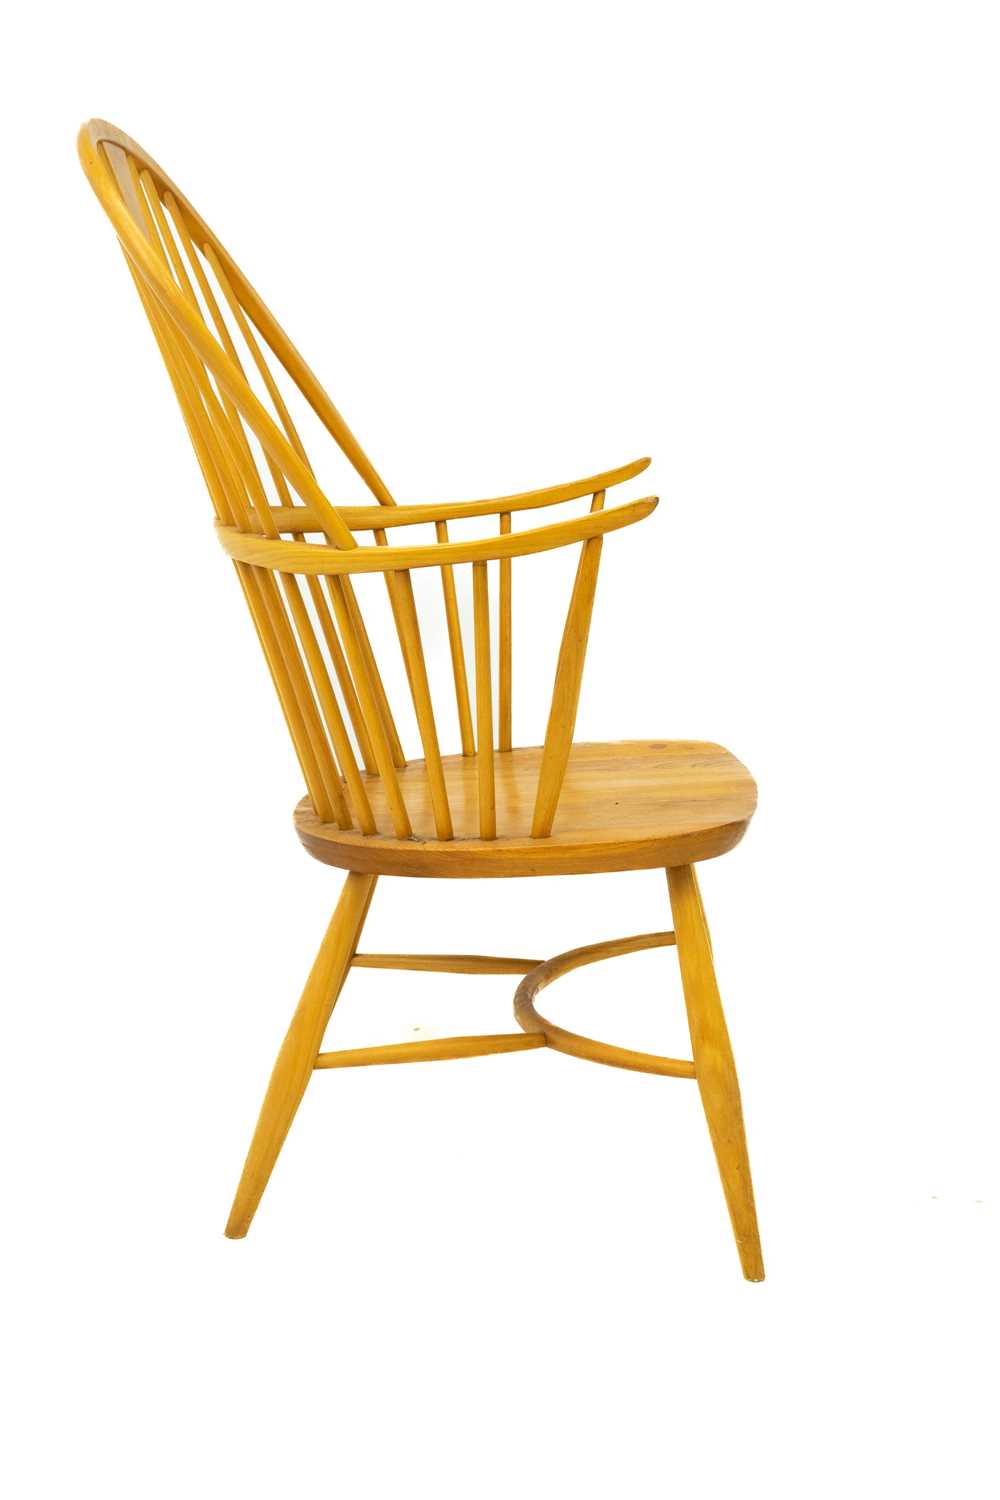 An Ercol model 472 Windsor armchair. - Image 2 of 4